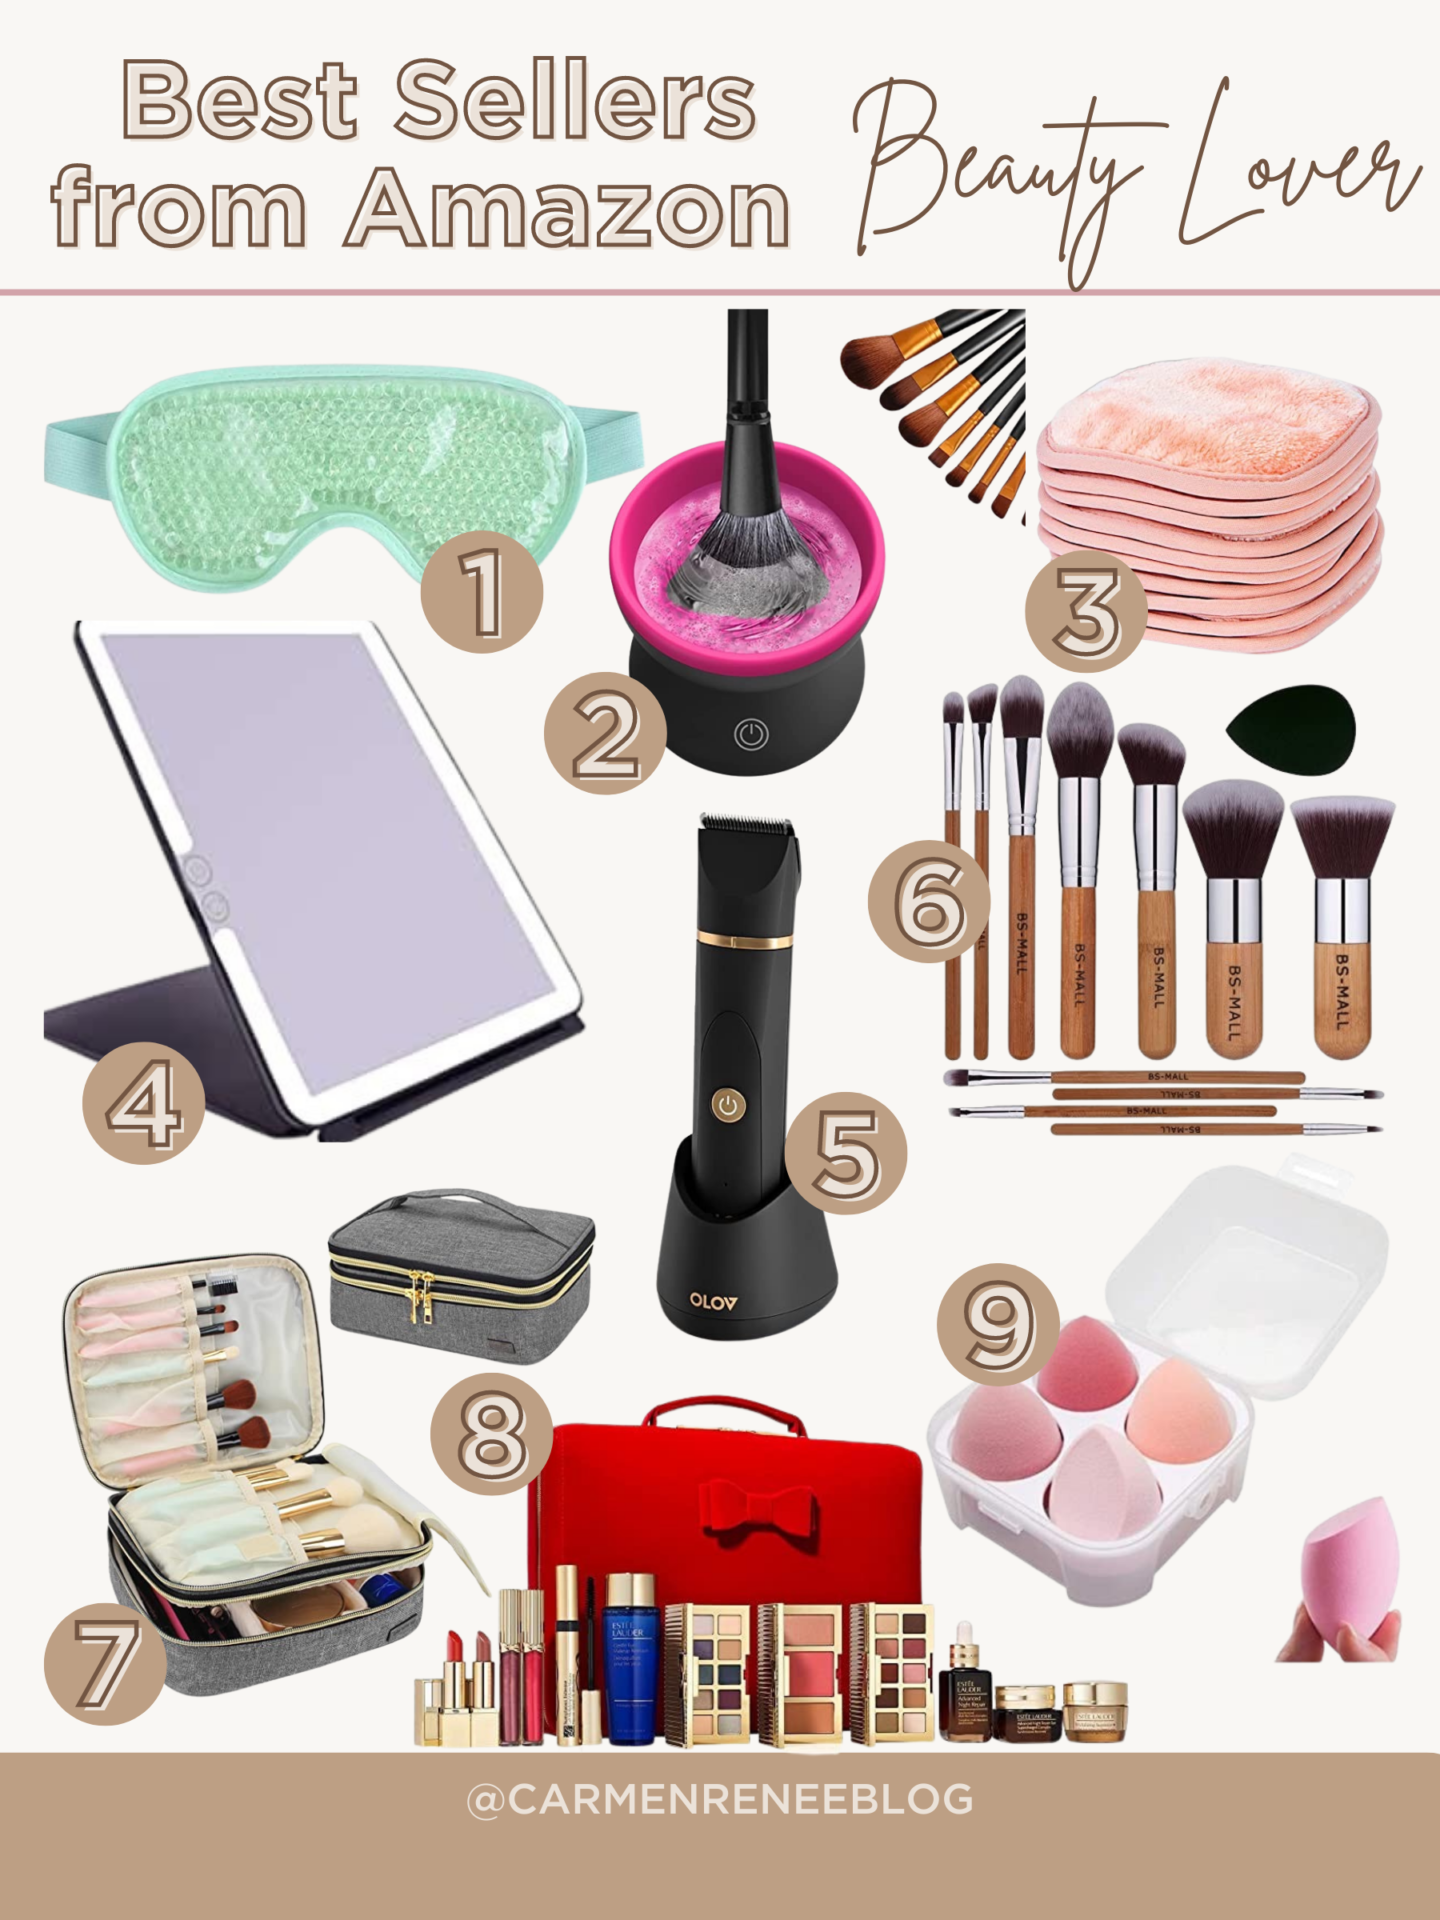 Best Sellers from Amazon for the Beauty Lover